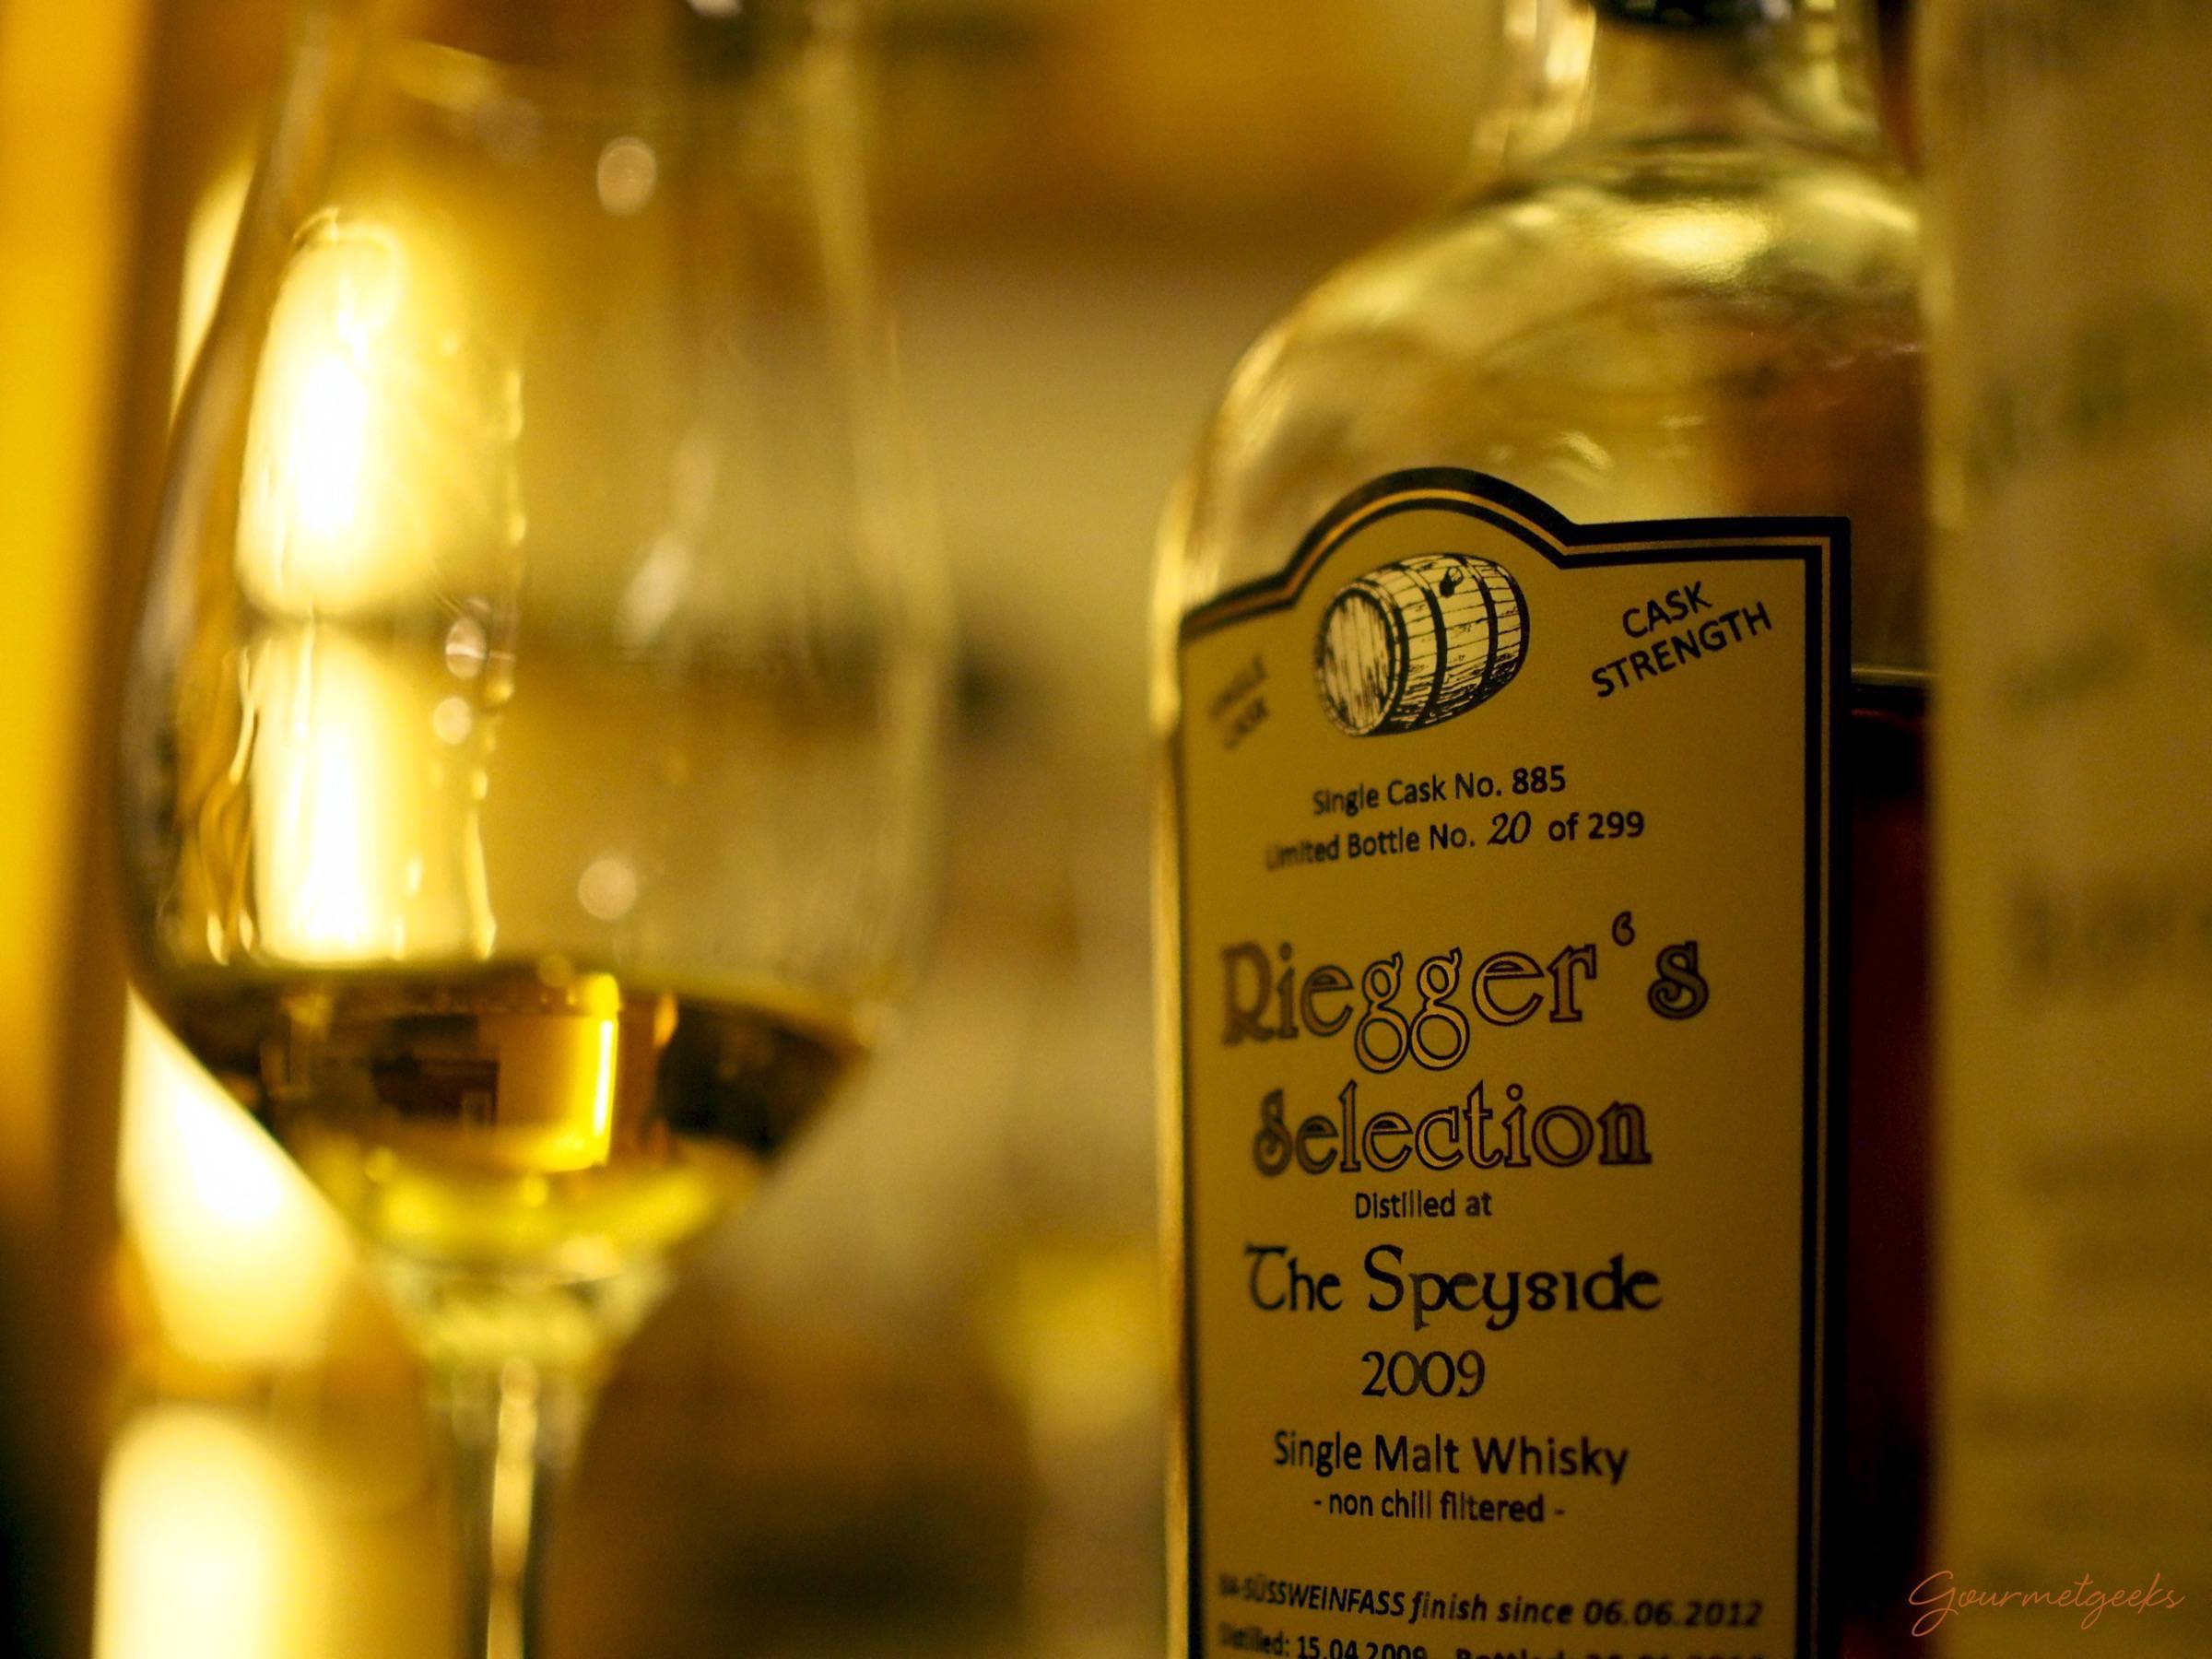 The Speyside 2009 aus der Riegger's Selection